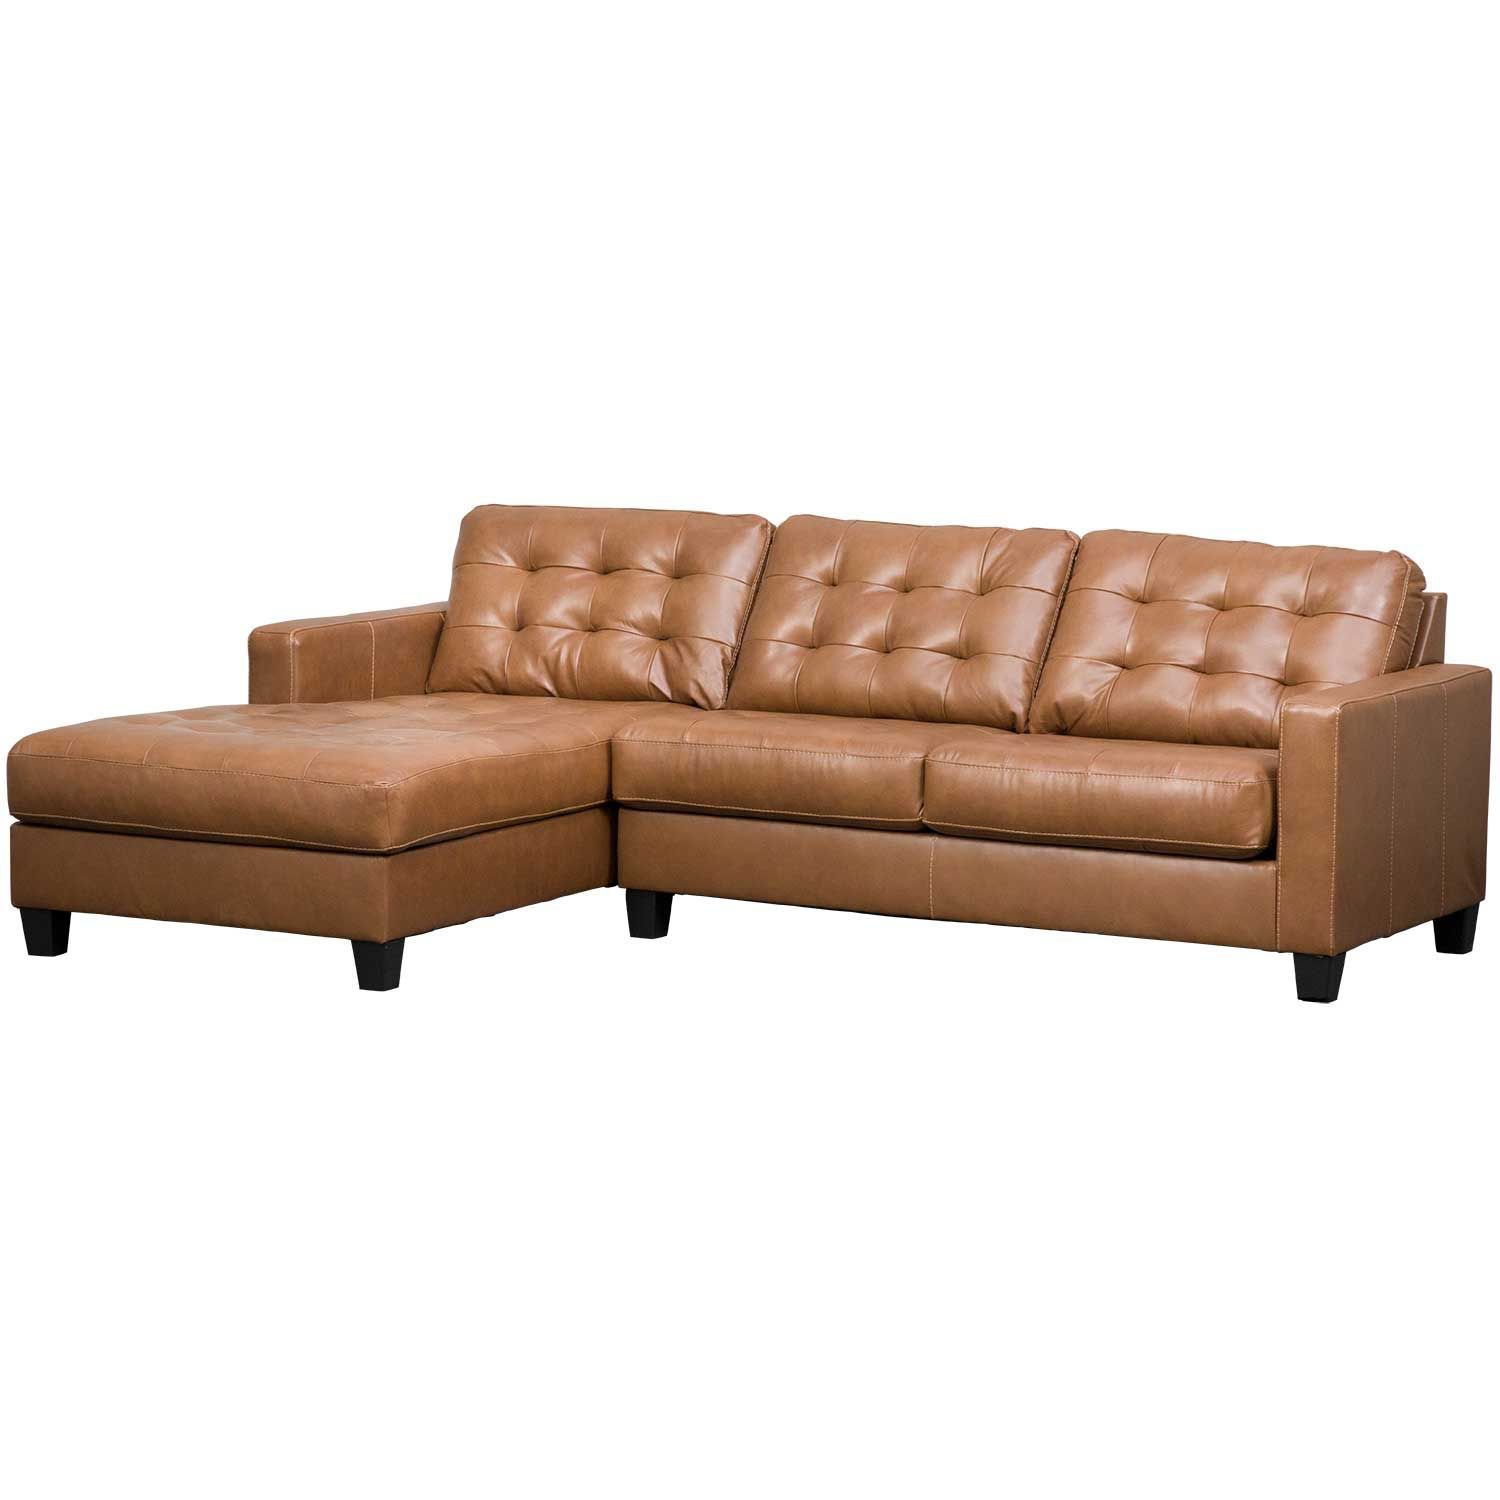 Oost Timor Hoes prinses 2pc Italian Leather Sectional with LAF Chaise | 0B0-111LC-2PC | AFW.com